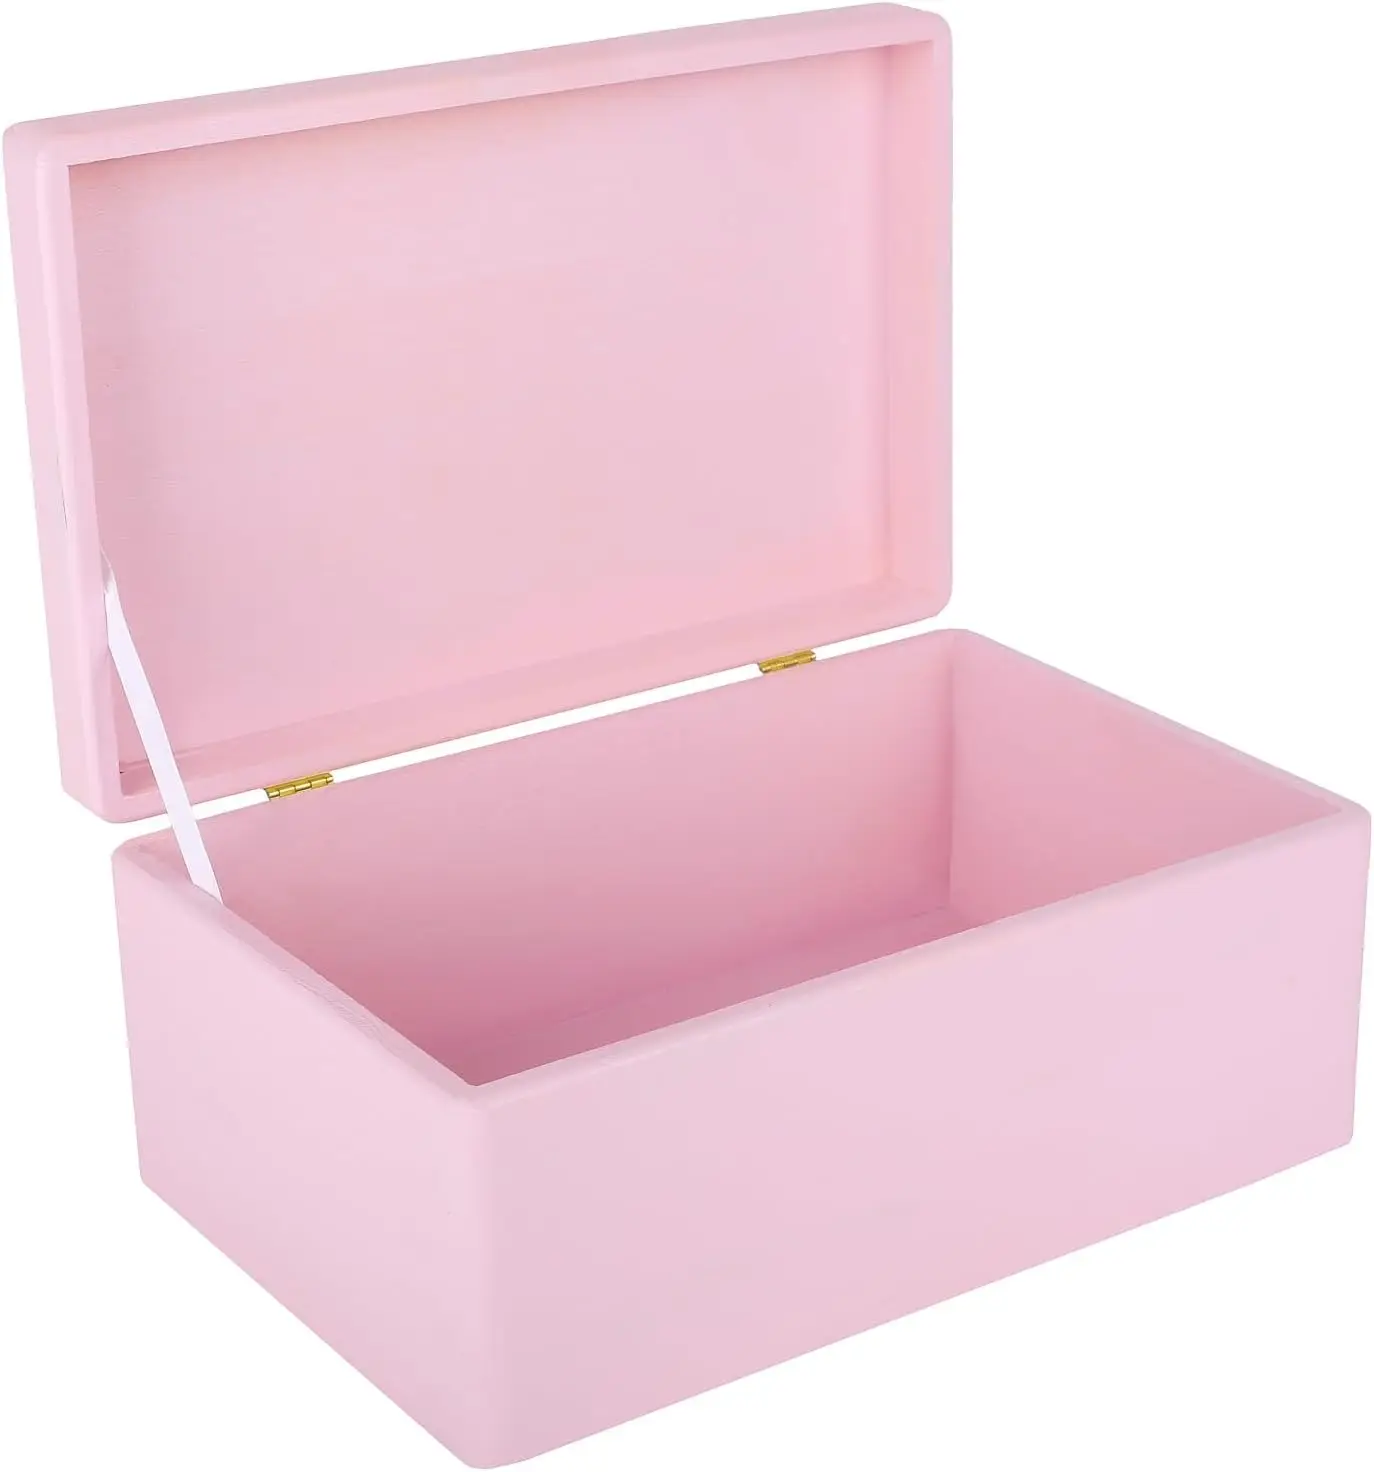 

Creative Deco Large Pink Wooden Box Storage with Hinged Lid | 11.8 x 7.87 x 5.51 inches (+-0.5) | Gift Box for Shoes Clothes